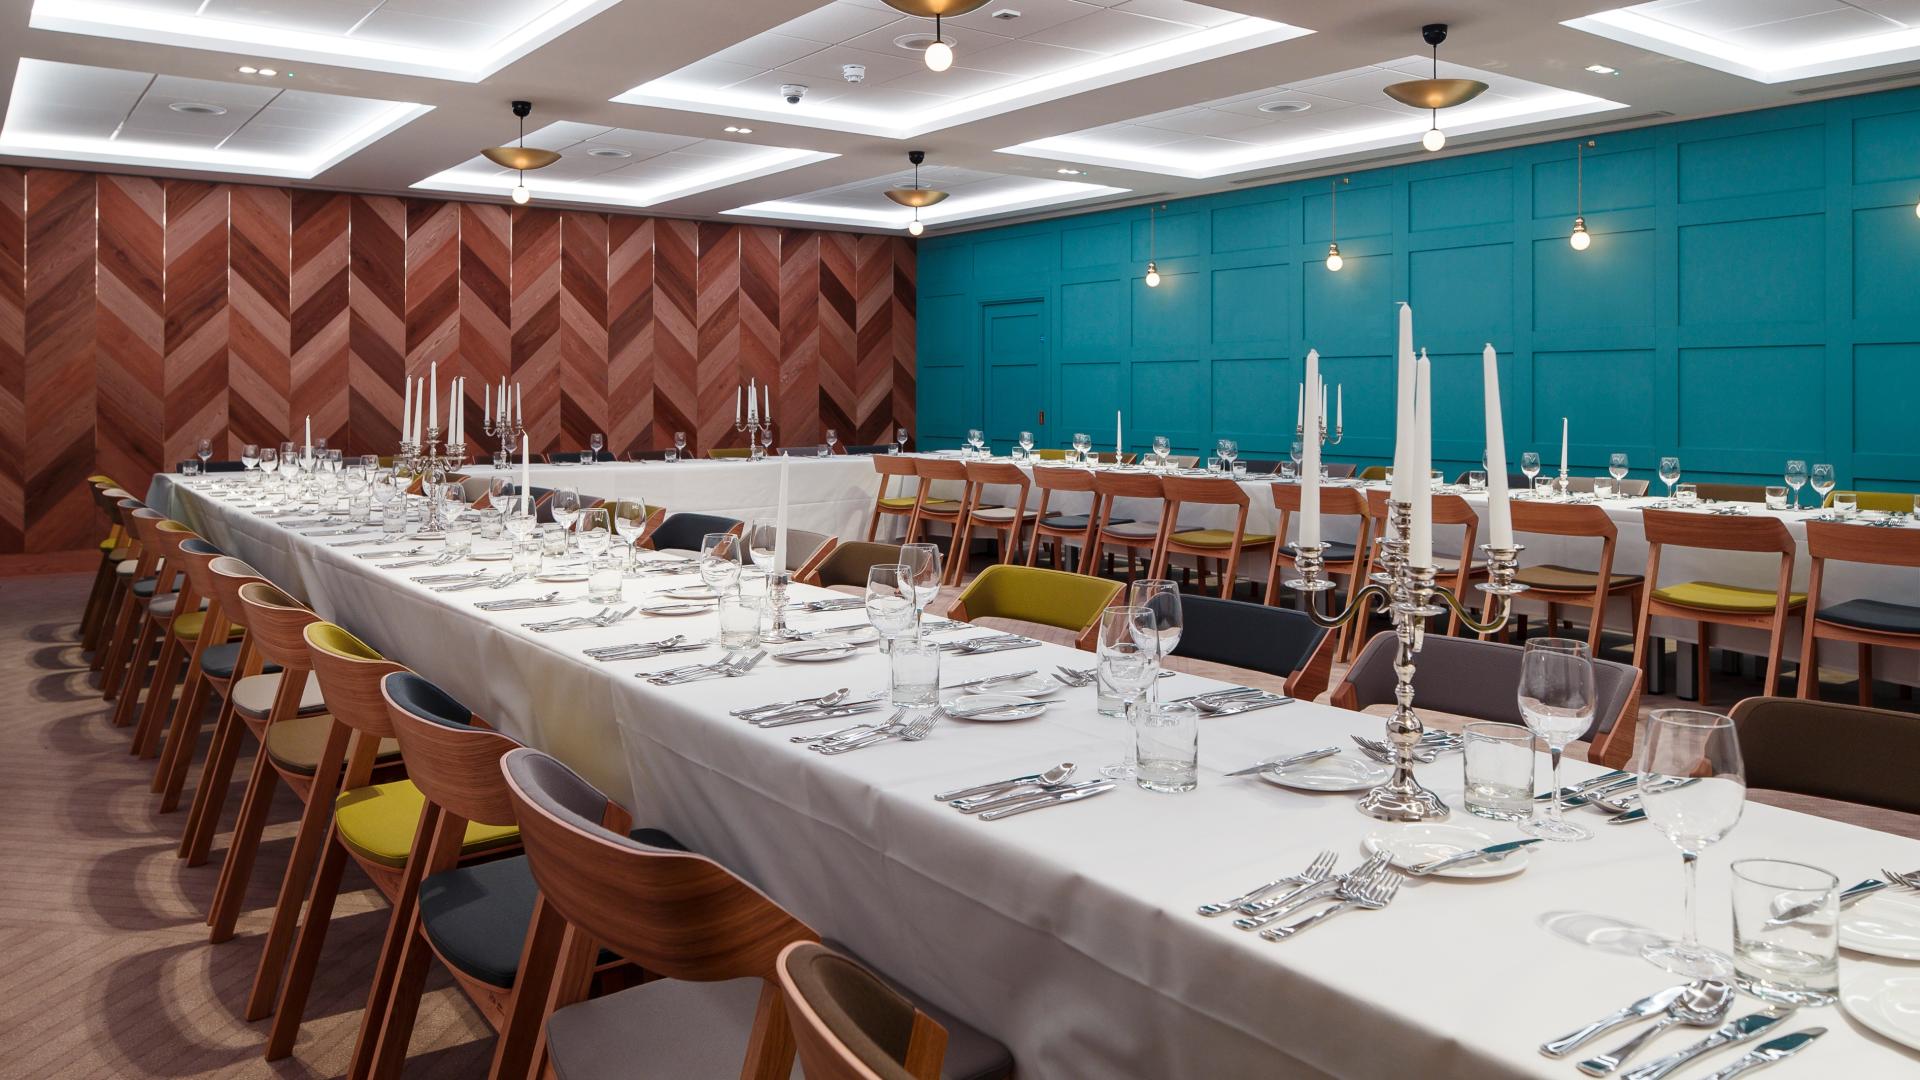 Function Rooms for Hire in South East London